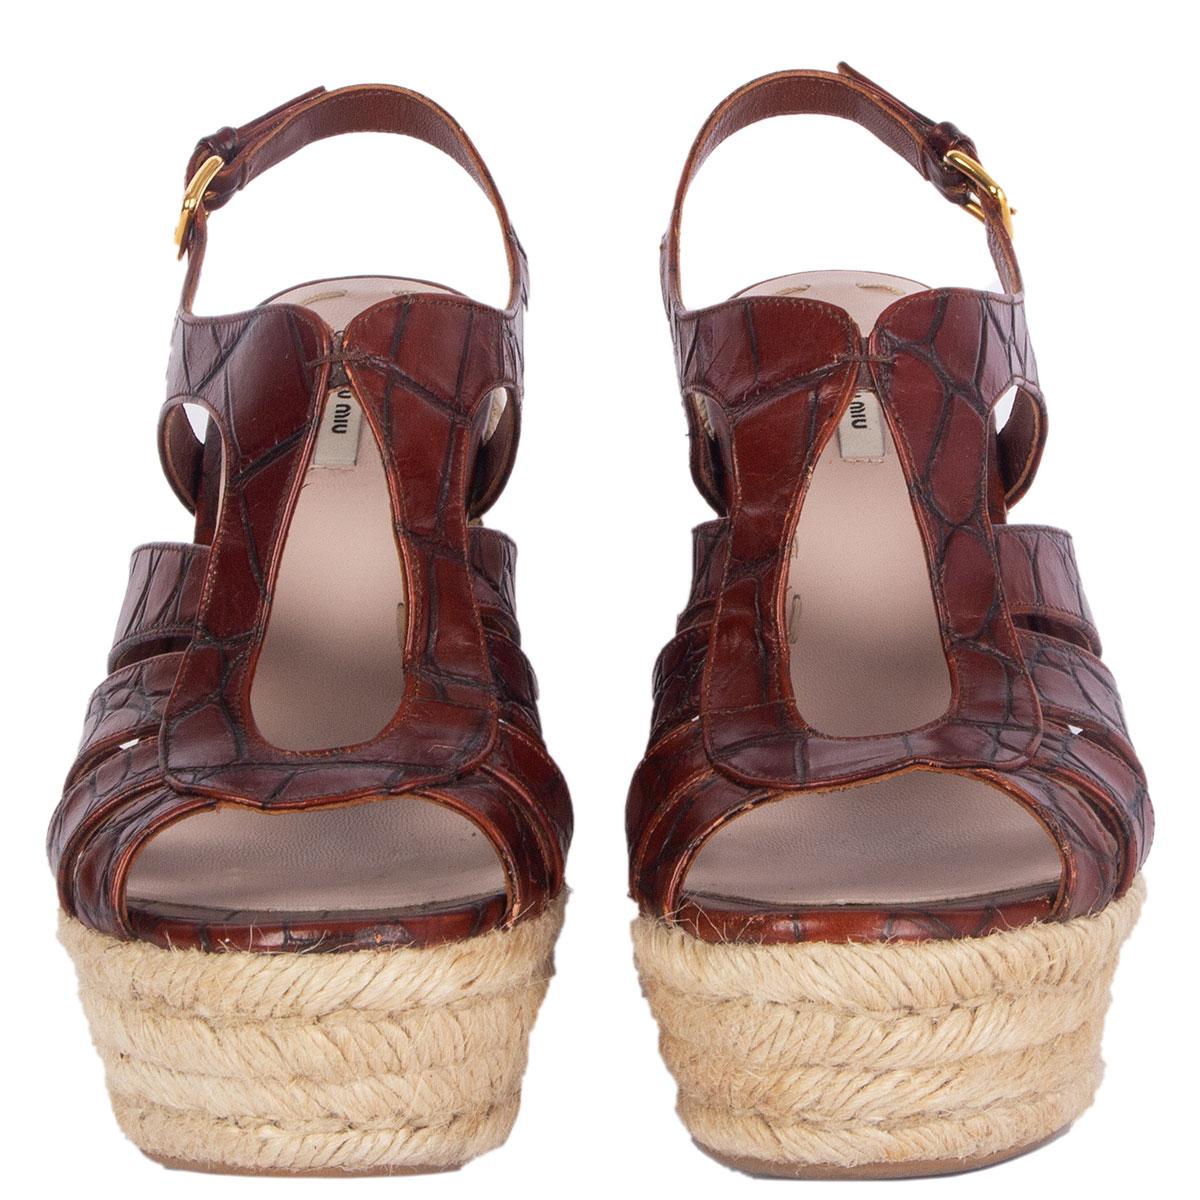 100% authentic Miu Miu espadrilles platform wedge sandals in cognac brown croco embossed leather. Have been worn and are in excellent condition. 

\
Imprinted Size	36.5
Shoe Size	36.5
Inside Sole	23.5cm (9.2in)
Width	8cm (3.1in)
Heel	11cm